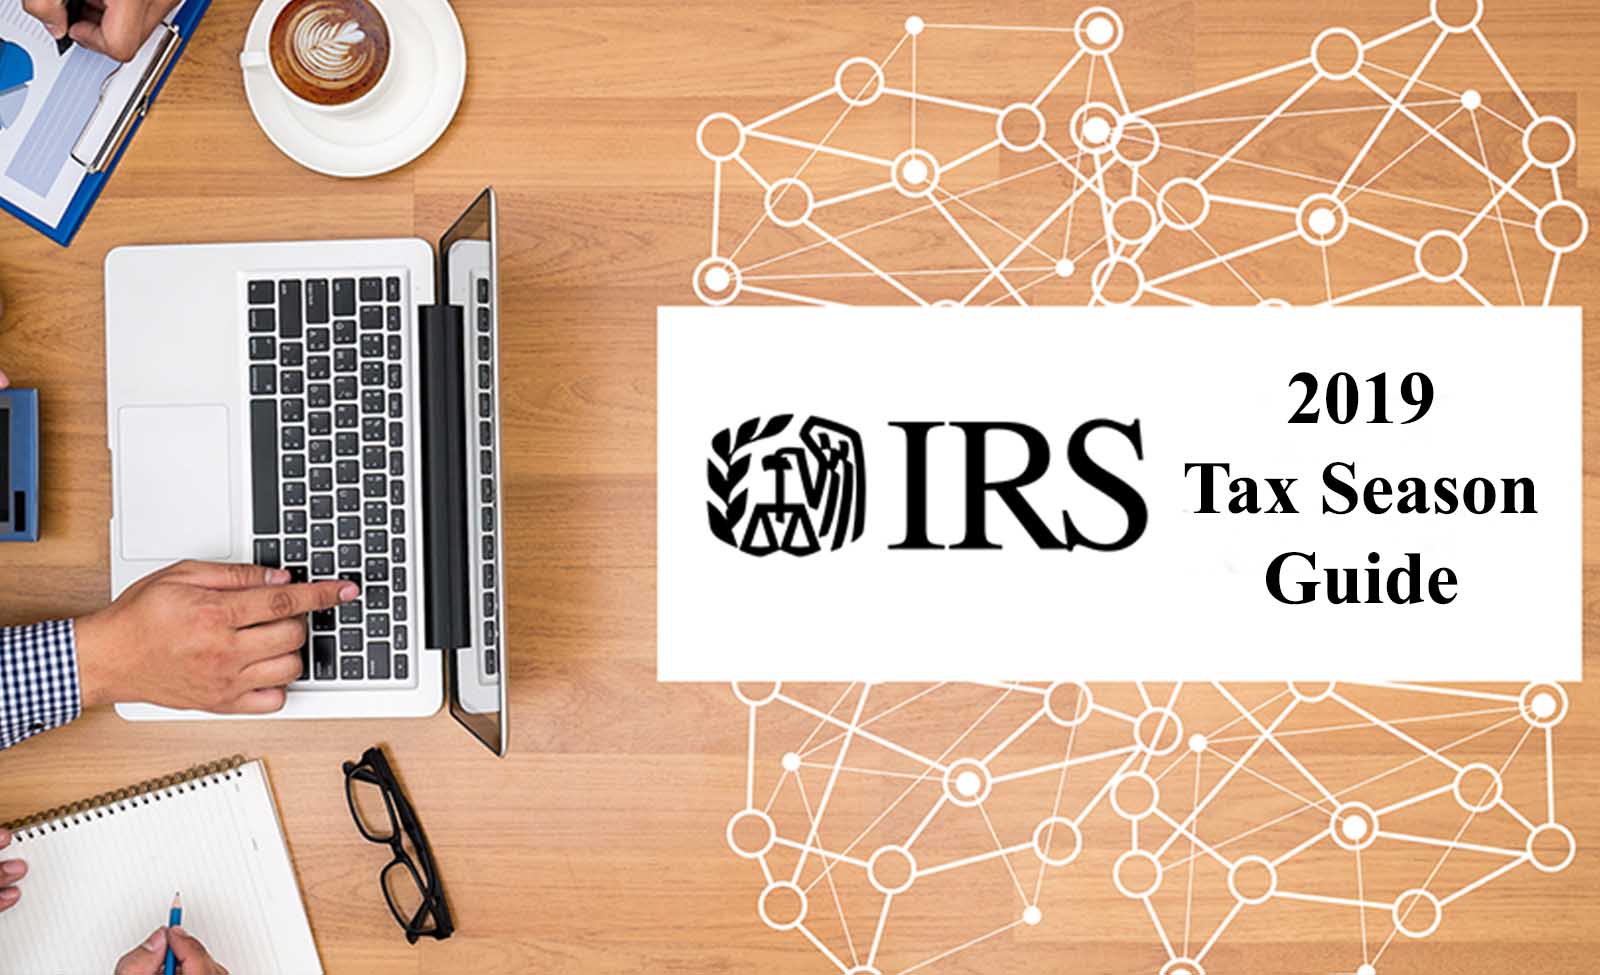 Learn everything you need to know about the 2019 Tax Season